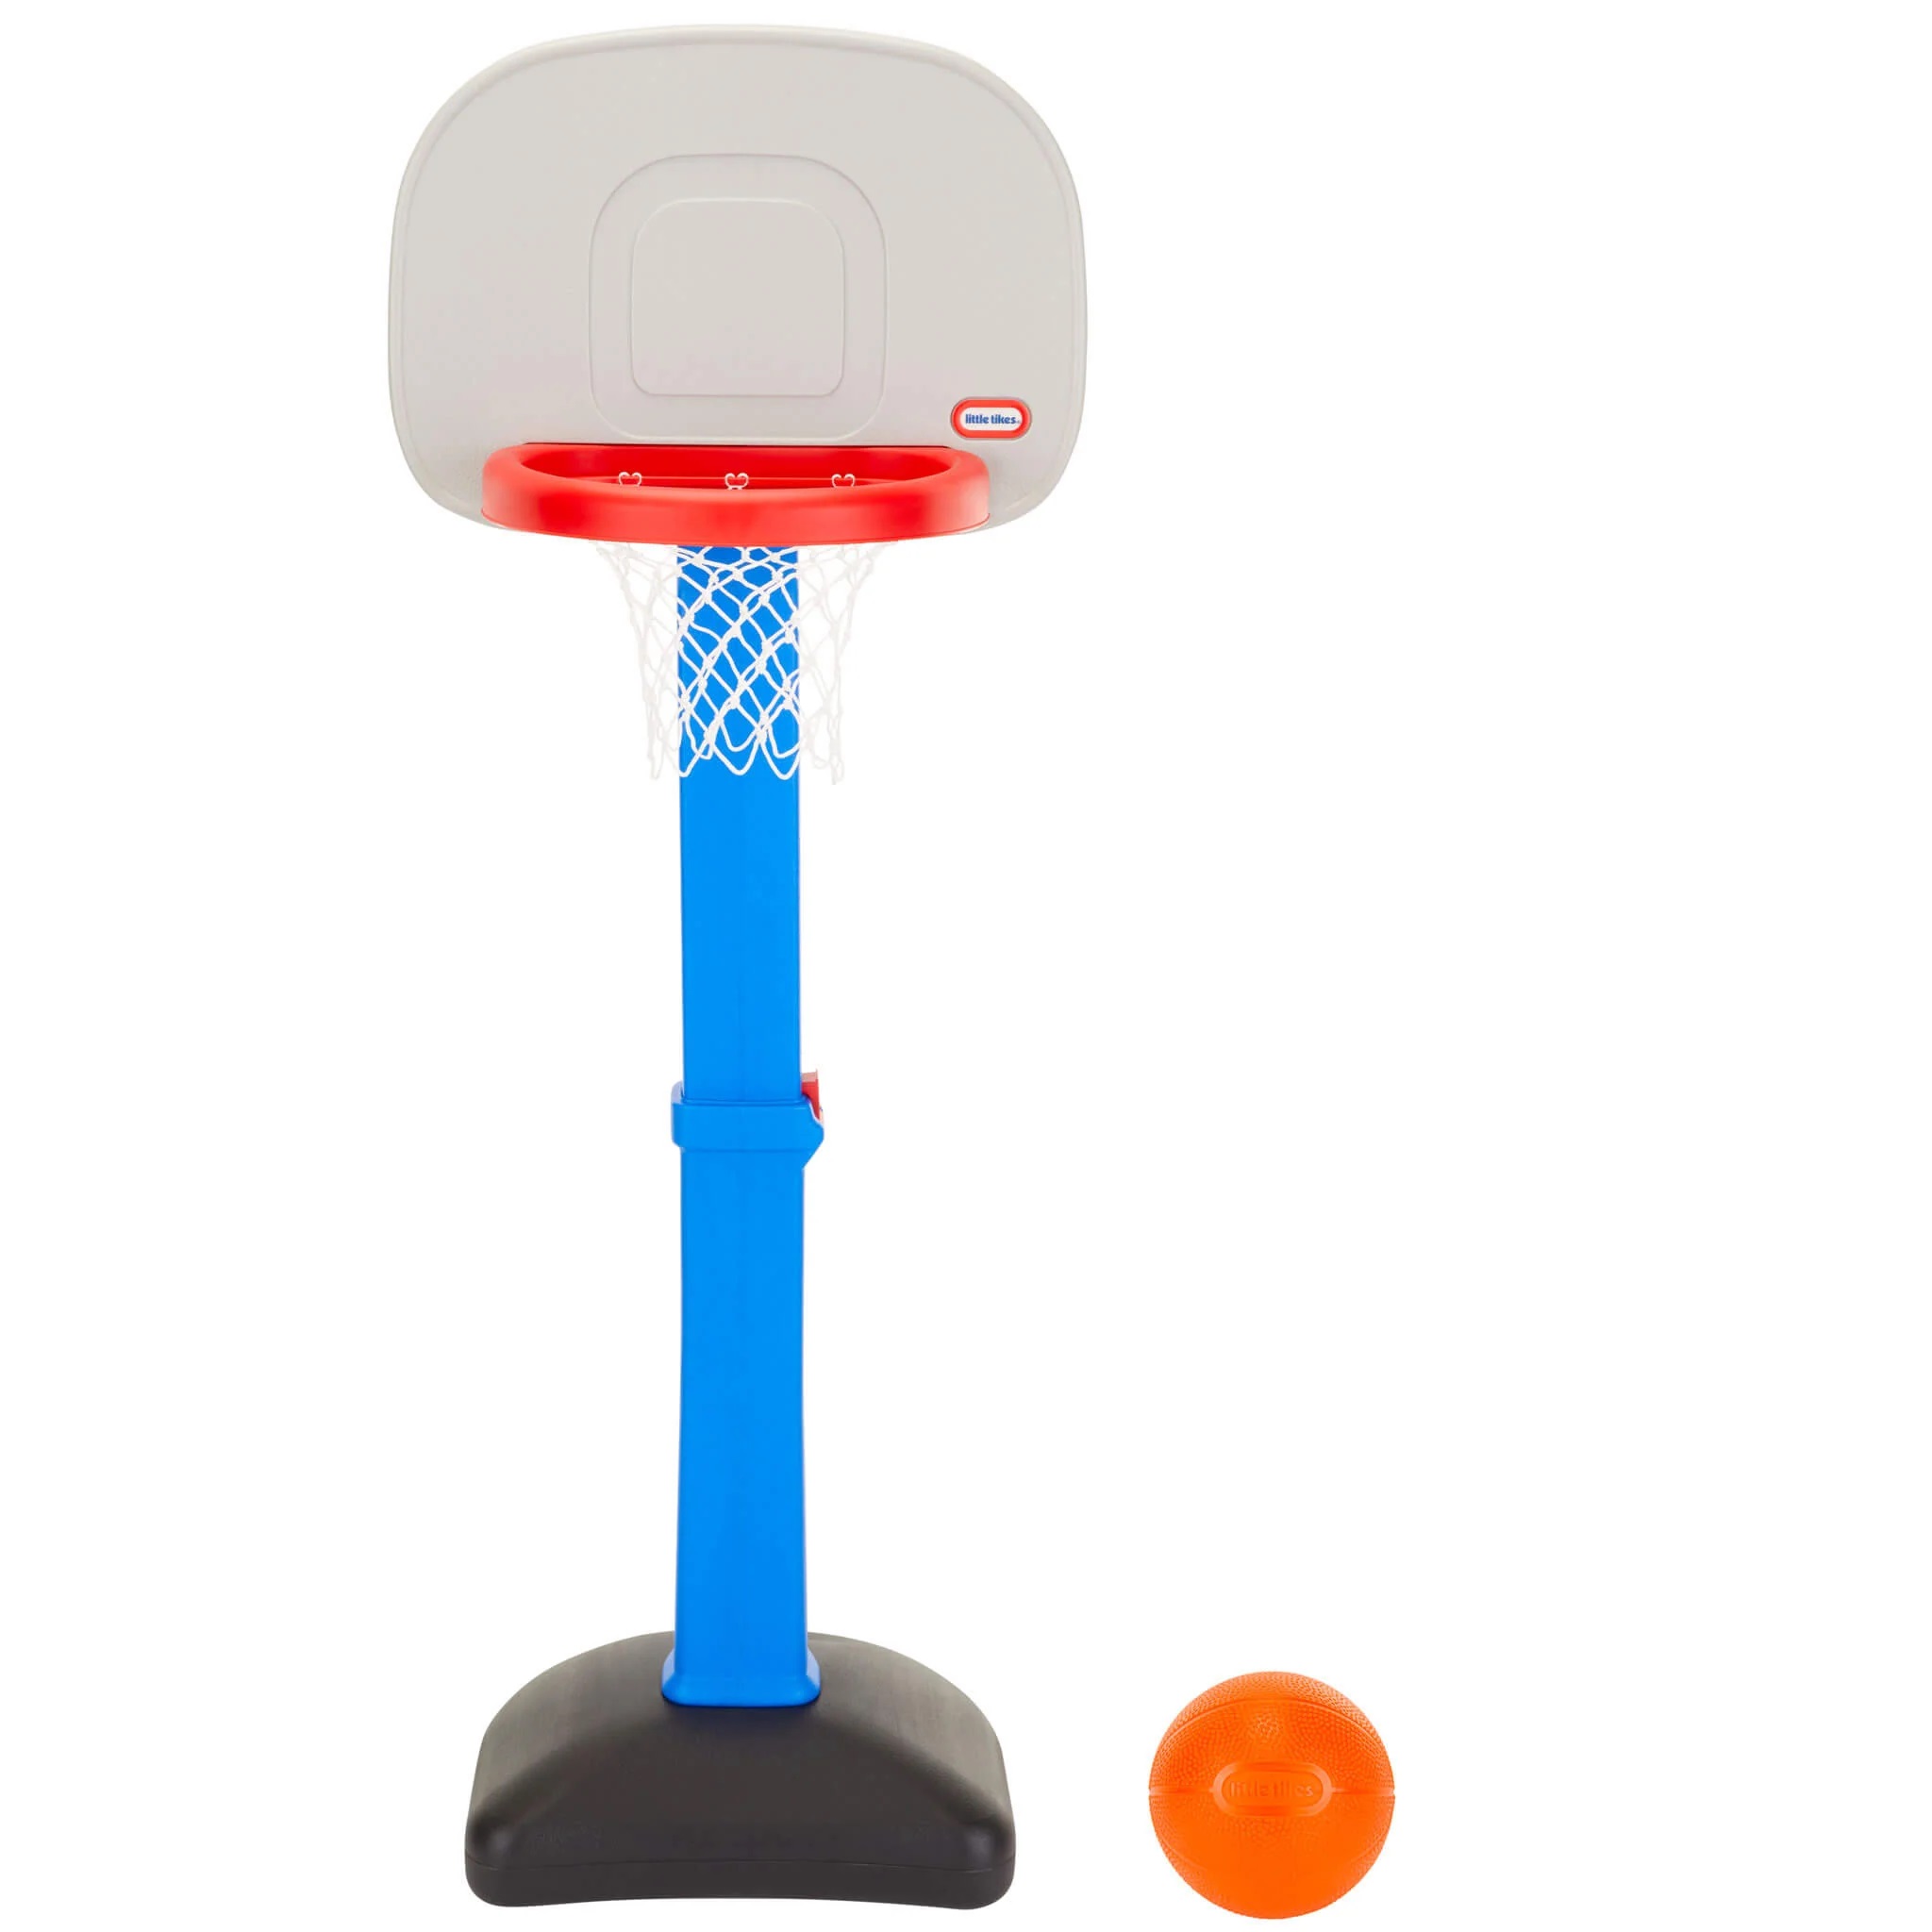 Little Tikes TotSports Easy Score Toy Basketball Hoop with Ball, Height Adjustable, Indoor Outdoor Backyard Toy Sports Play Set, Kids Girls Boys Ages 18 months to 5 Years, Blue - image 1 of 6